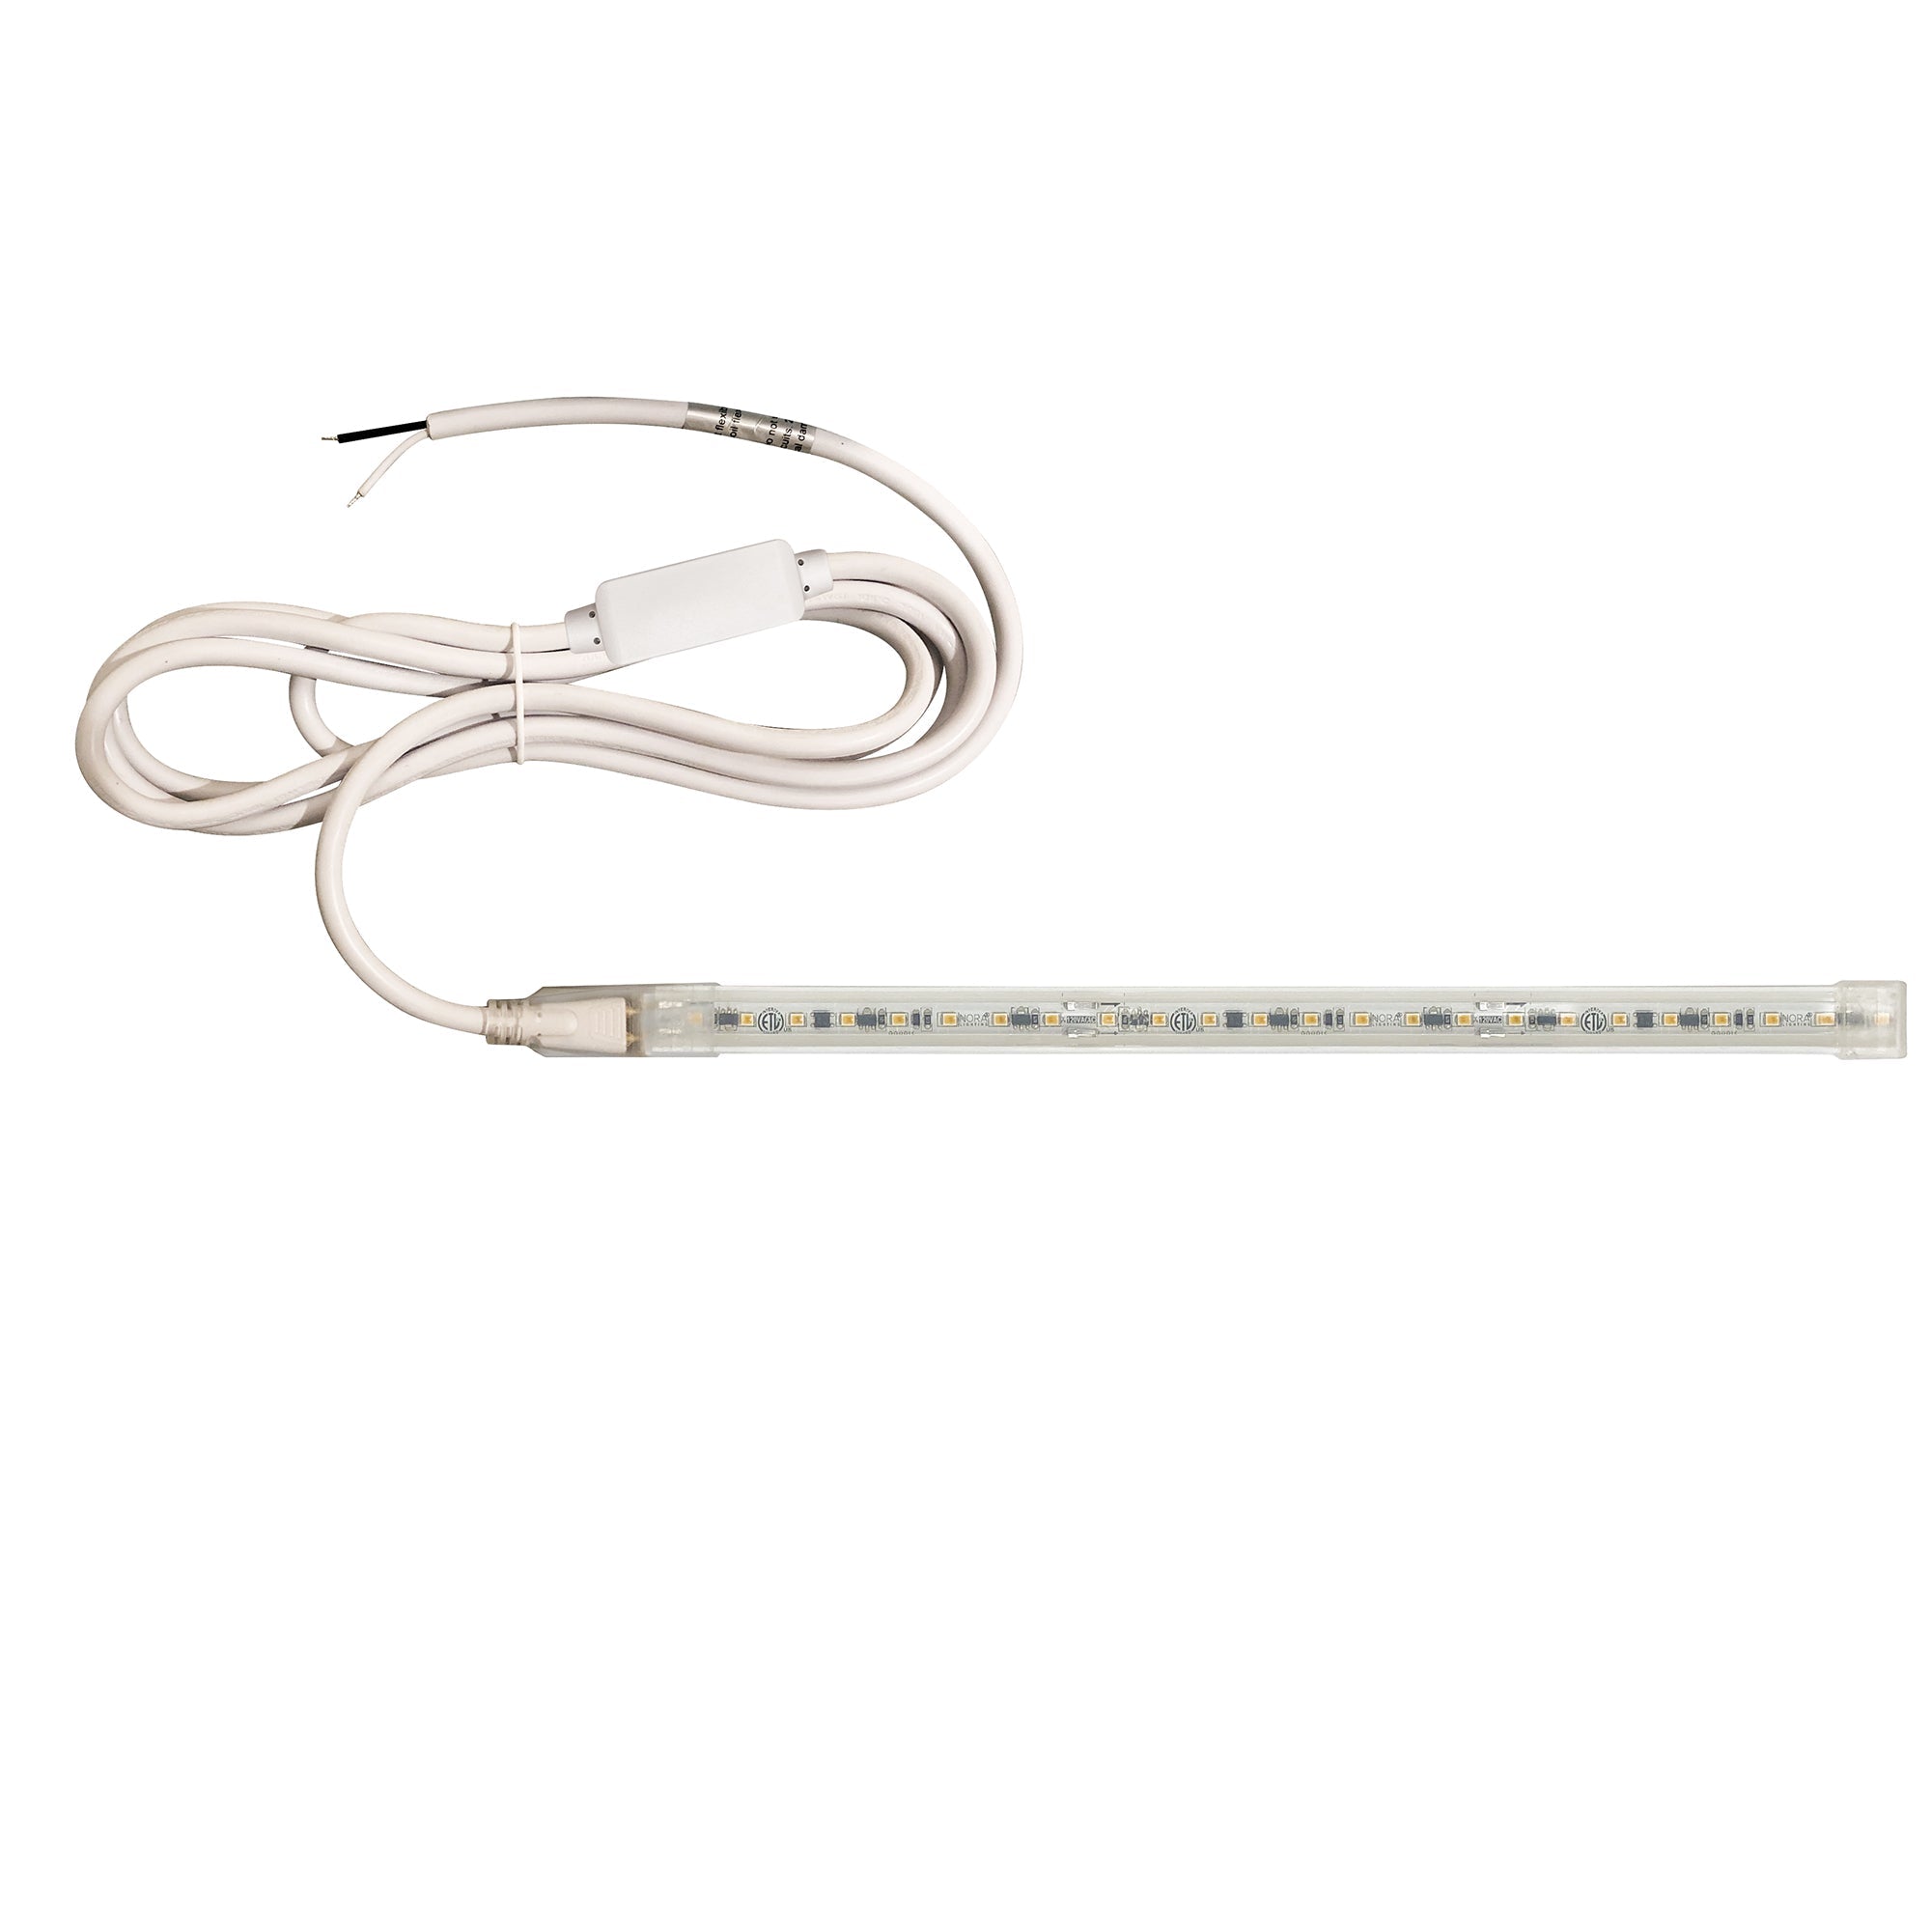 Nora Lighting NUTP13-W52-12-930/HWSP - Accent / Undercabinet - Custom Cut 52-ft 120V Continuous LED Tape Light, 330lm / 3.6W per foot, 3000K, w/ Mounting Clips and 8' Hardwired Power Cord w/ Surge Protector